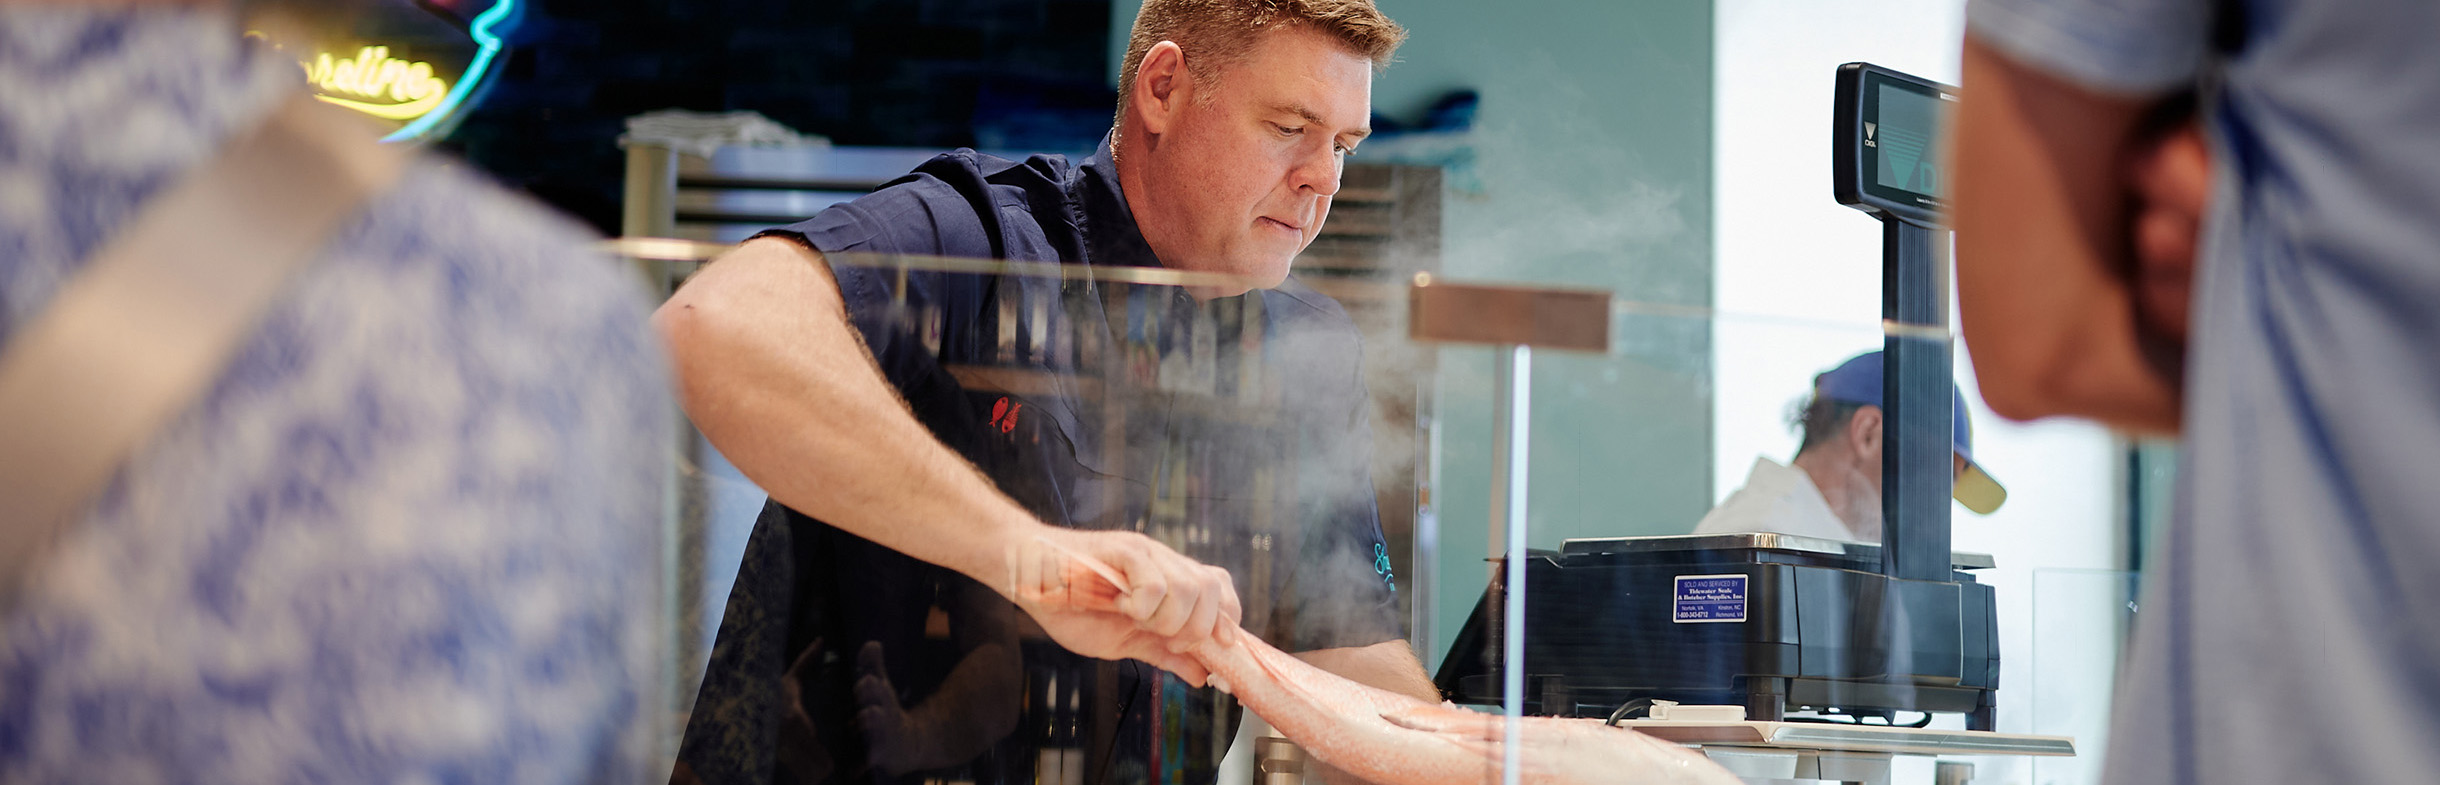 Shoreline Fresh Seafood Market - Photo of owner, David Whitby handling fish at the fresh, reliably sourced seafood case